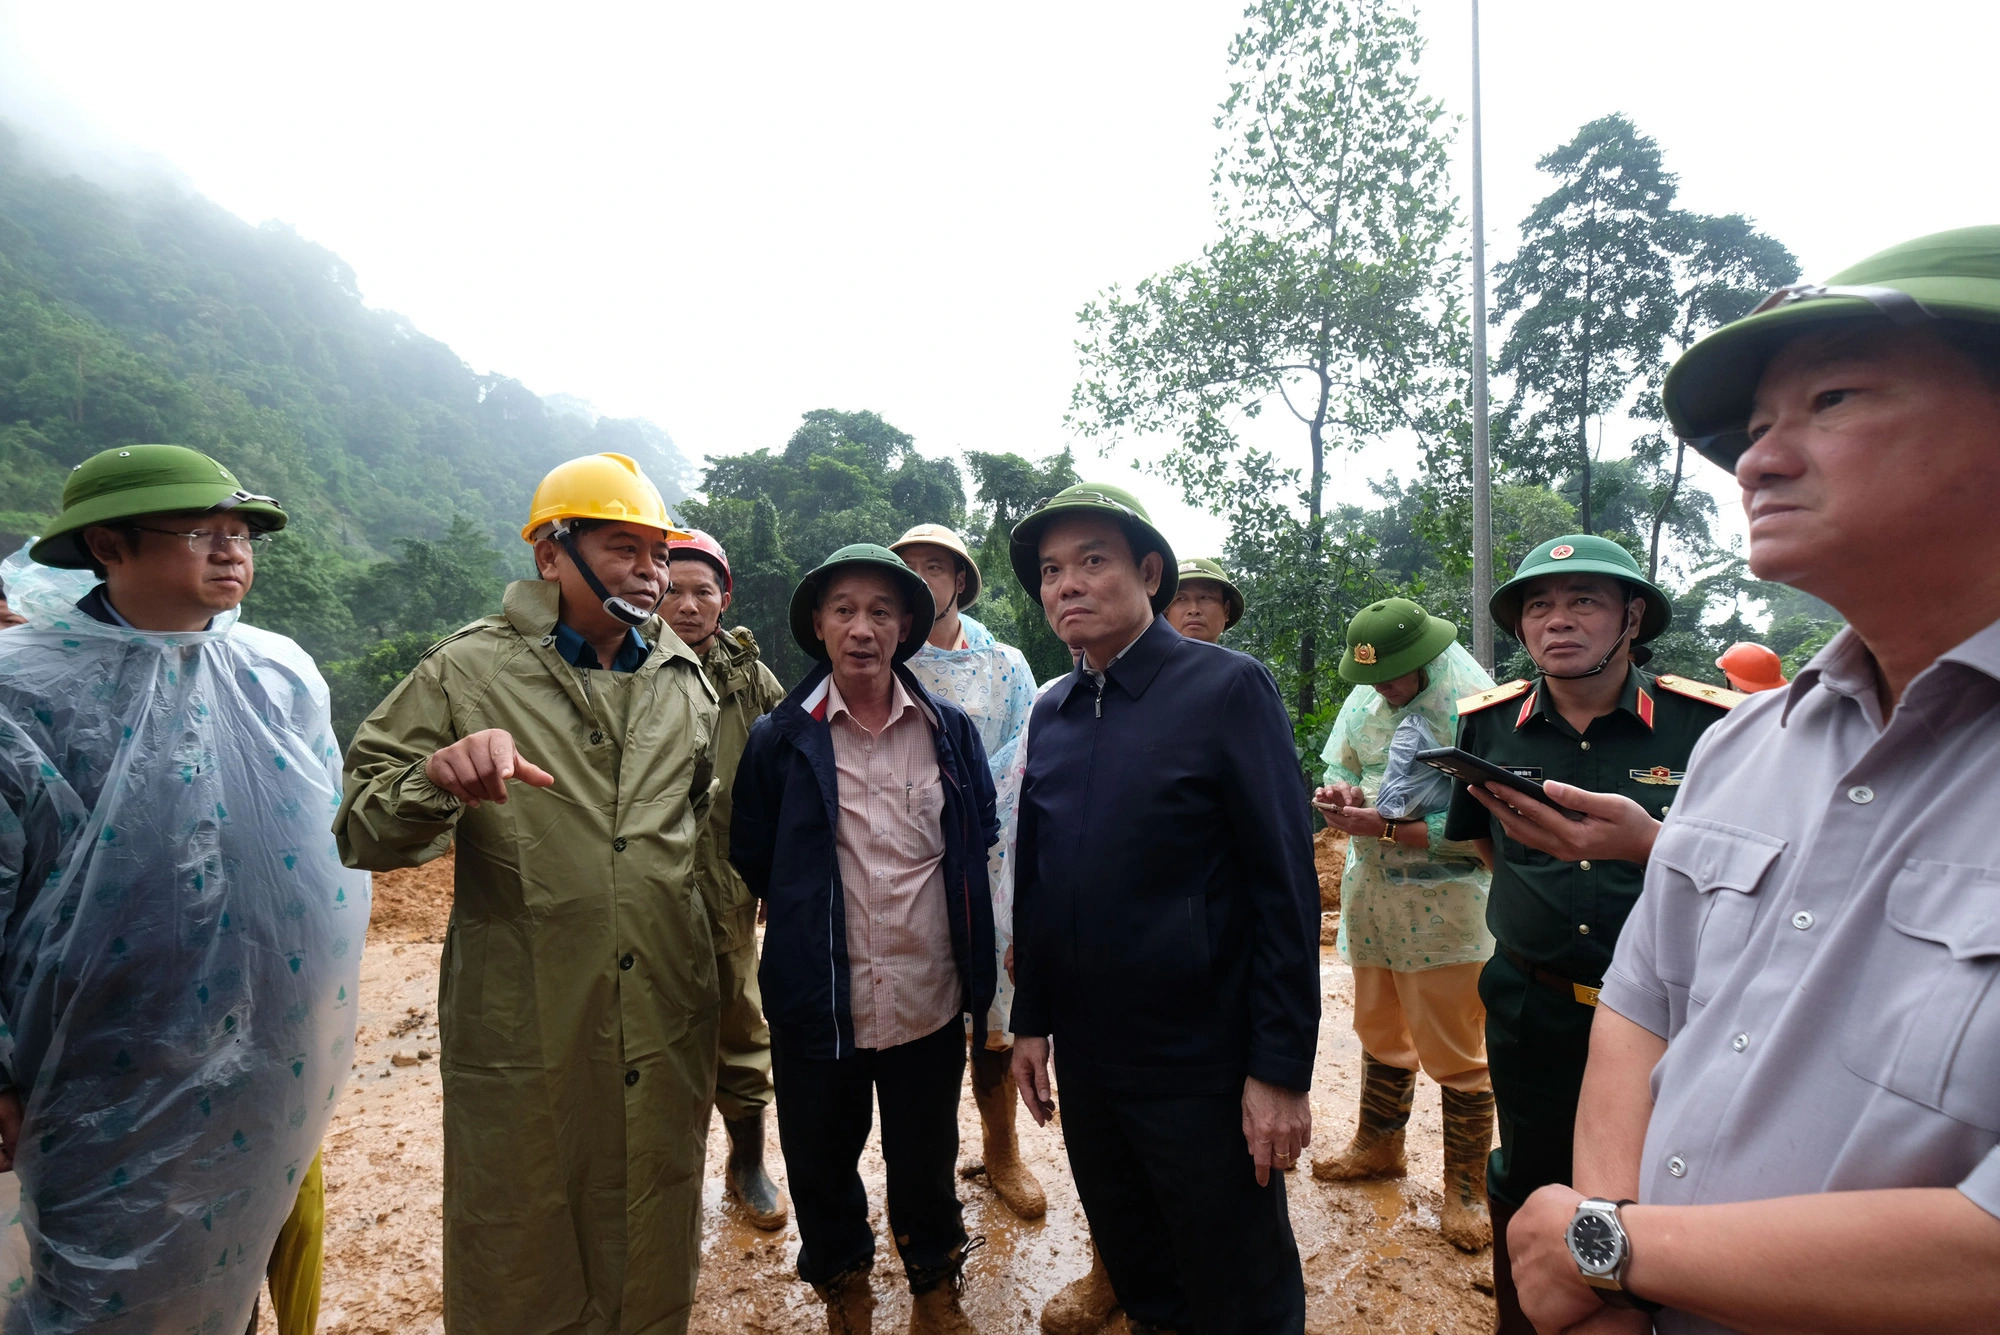 Deputy Prime Minister Tran Luu Quang (1st row, L, 4th) is seen at the scene of a fatal landslide, which took place in Lam Dong Province, Vietnam’s Central Highlands, July 30, 2023. Photo: Mai Vinh / Tuoi Tre